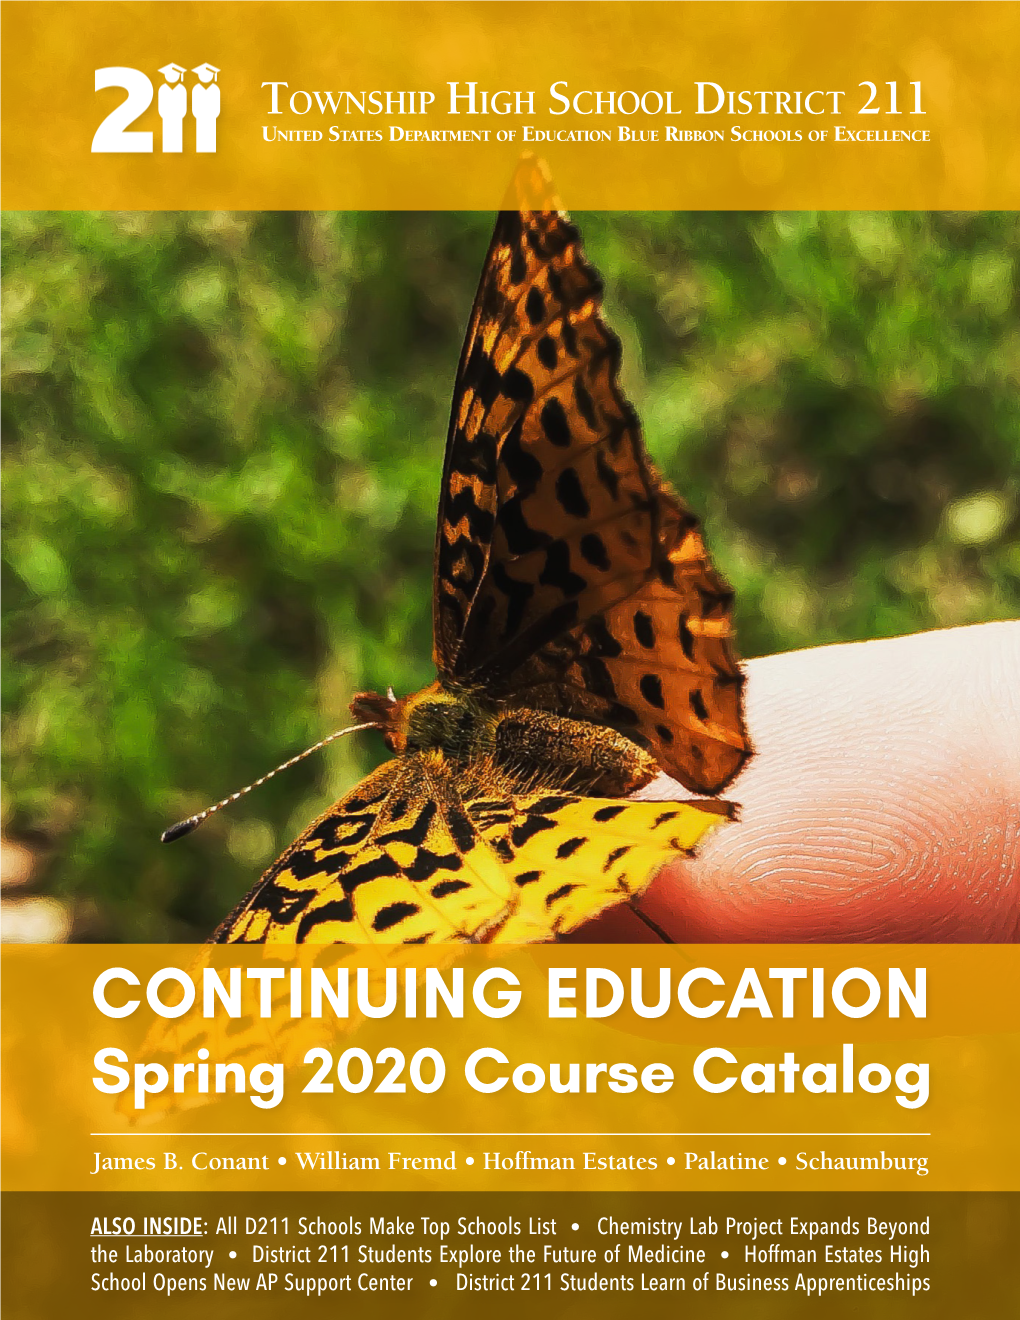 Continuing Education Catalog on the Web? Yes, the Continuing Education Catalog Is Located on the District 211 Website at Adc.D211.Org